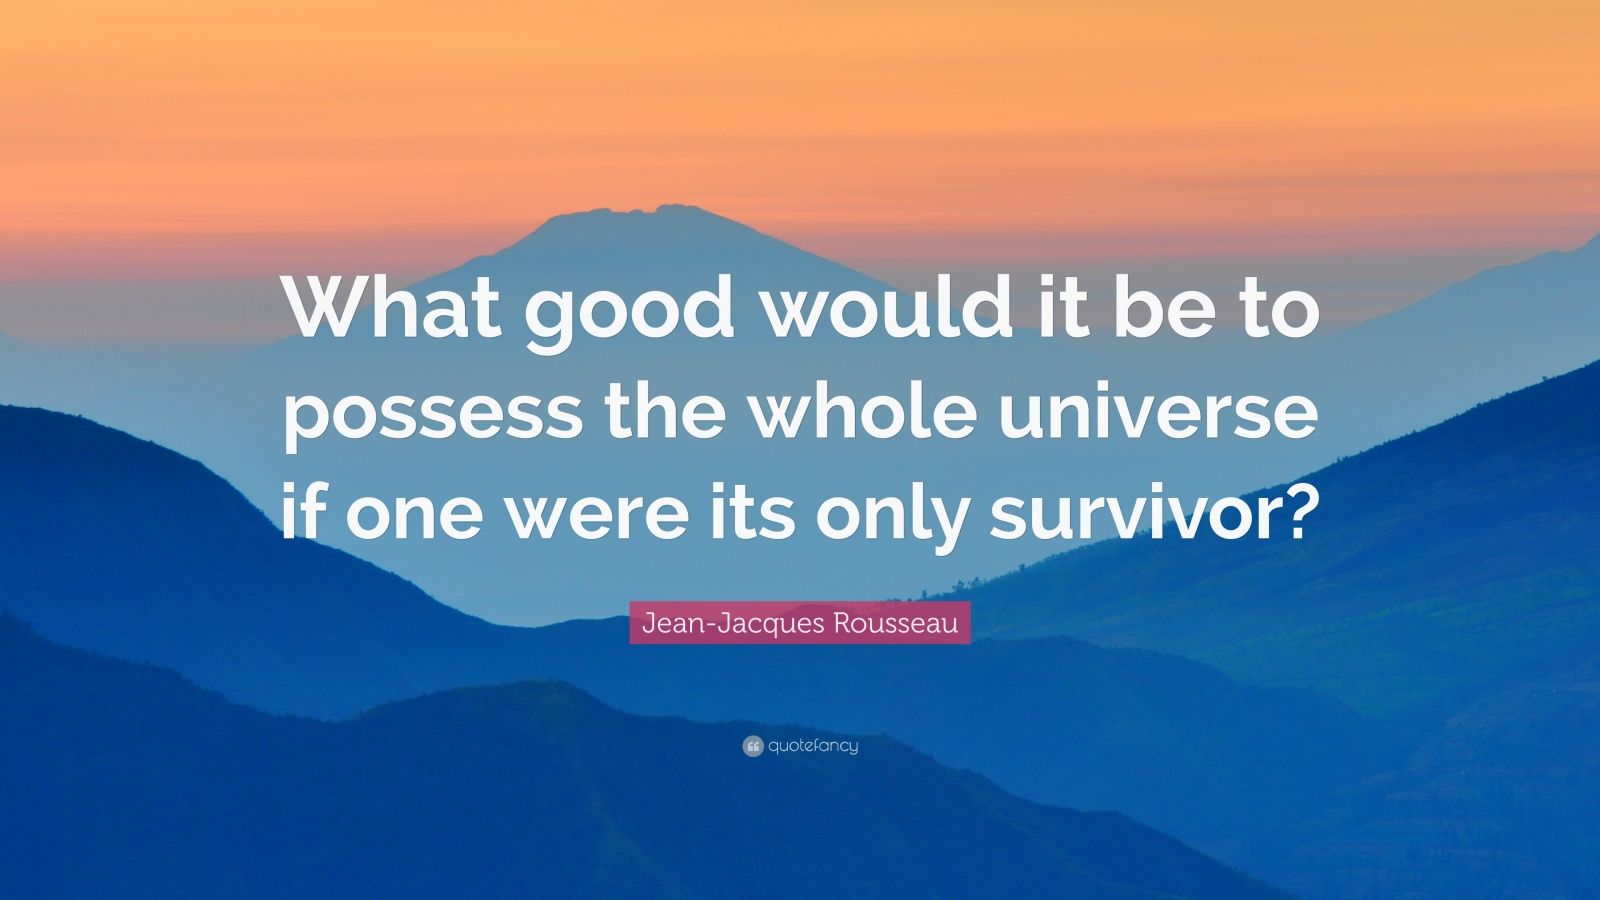 Jean Jacques Rousseau Quote “what Good Would It Be To Possess The Whole Universe If One Were